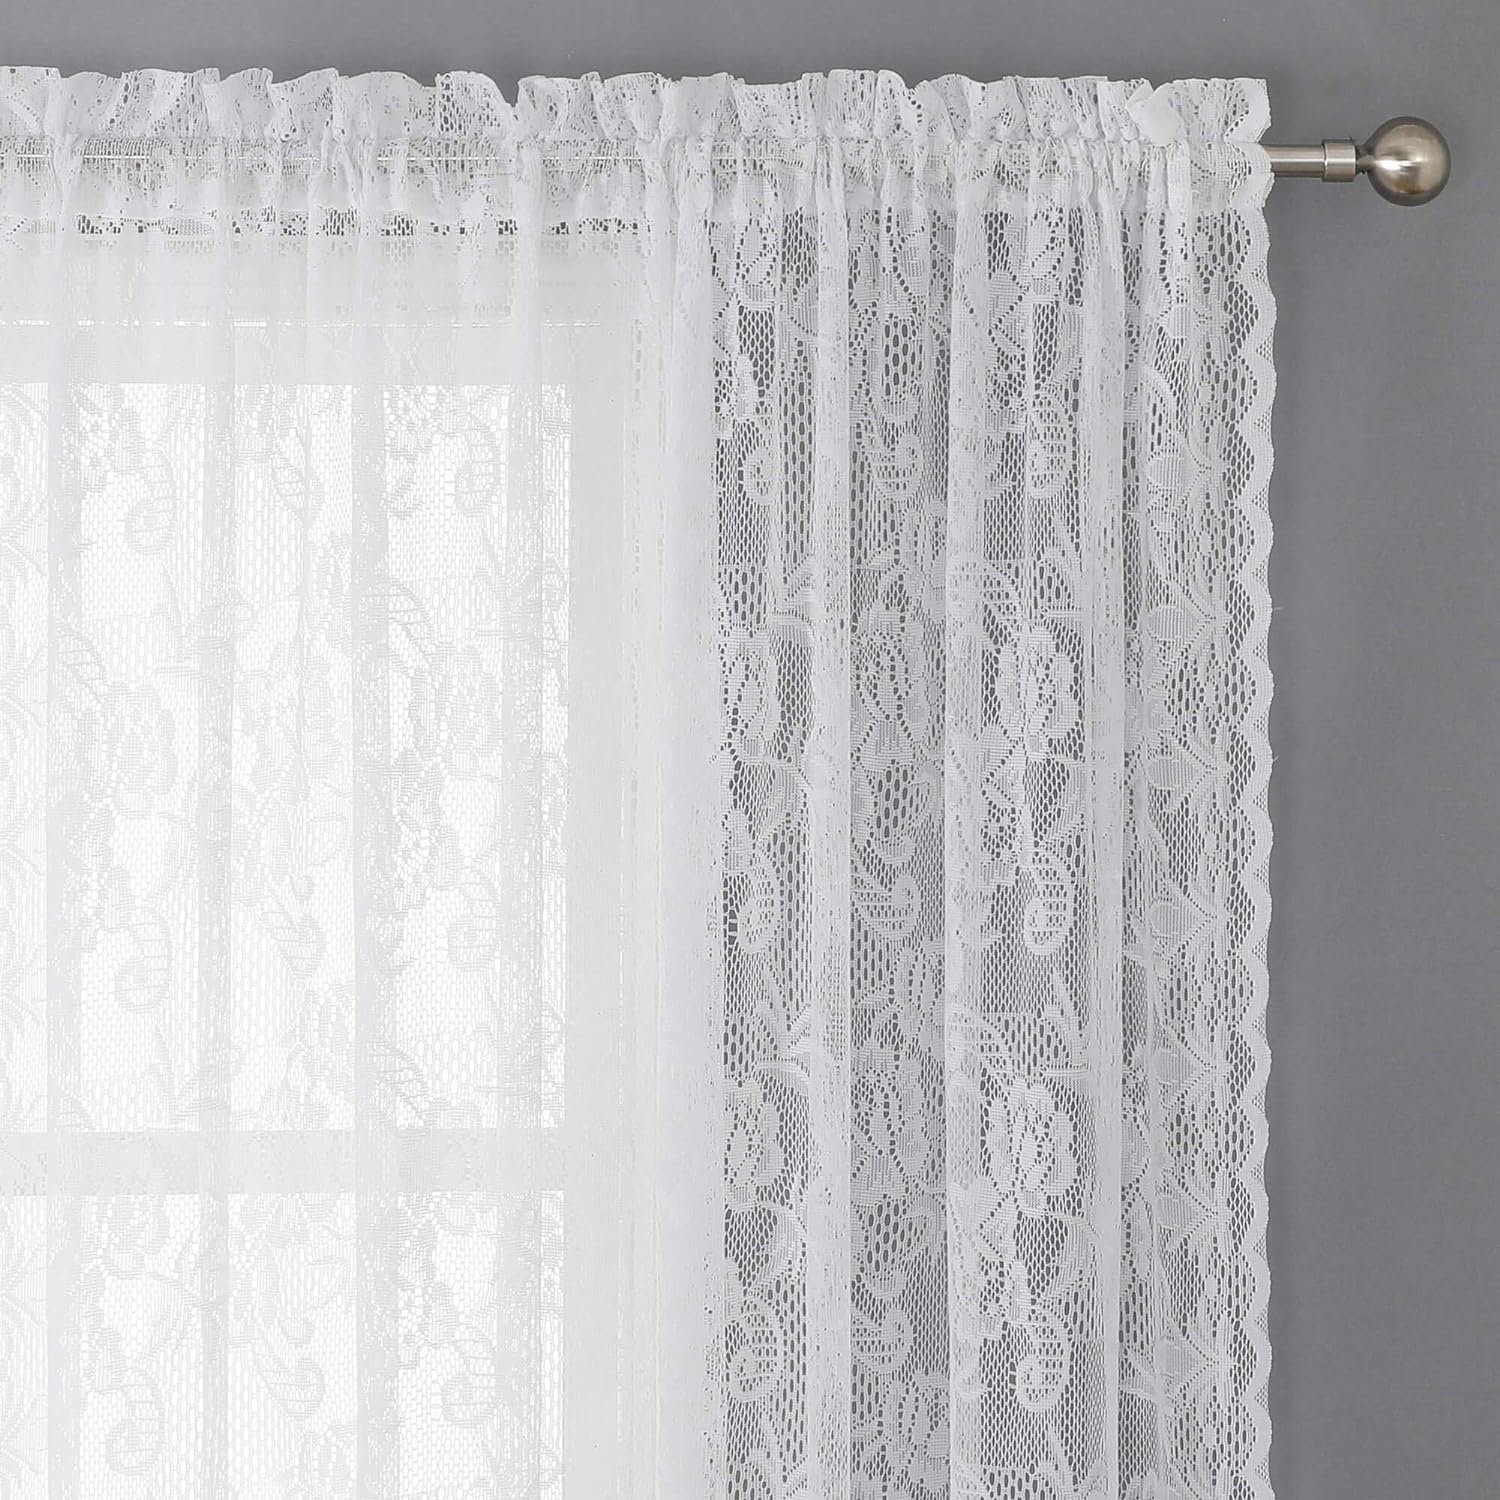 Short Fashion White Lace Sheer Curtain Valance Bedroom Living Room Window Drapes 